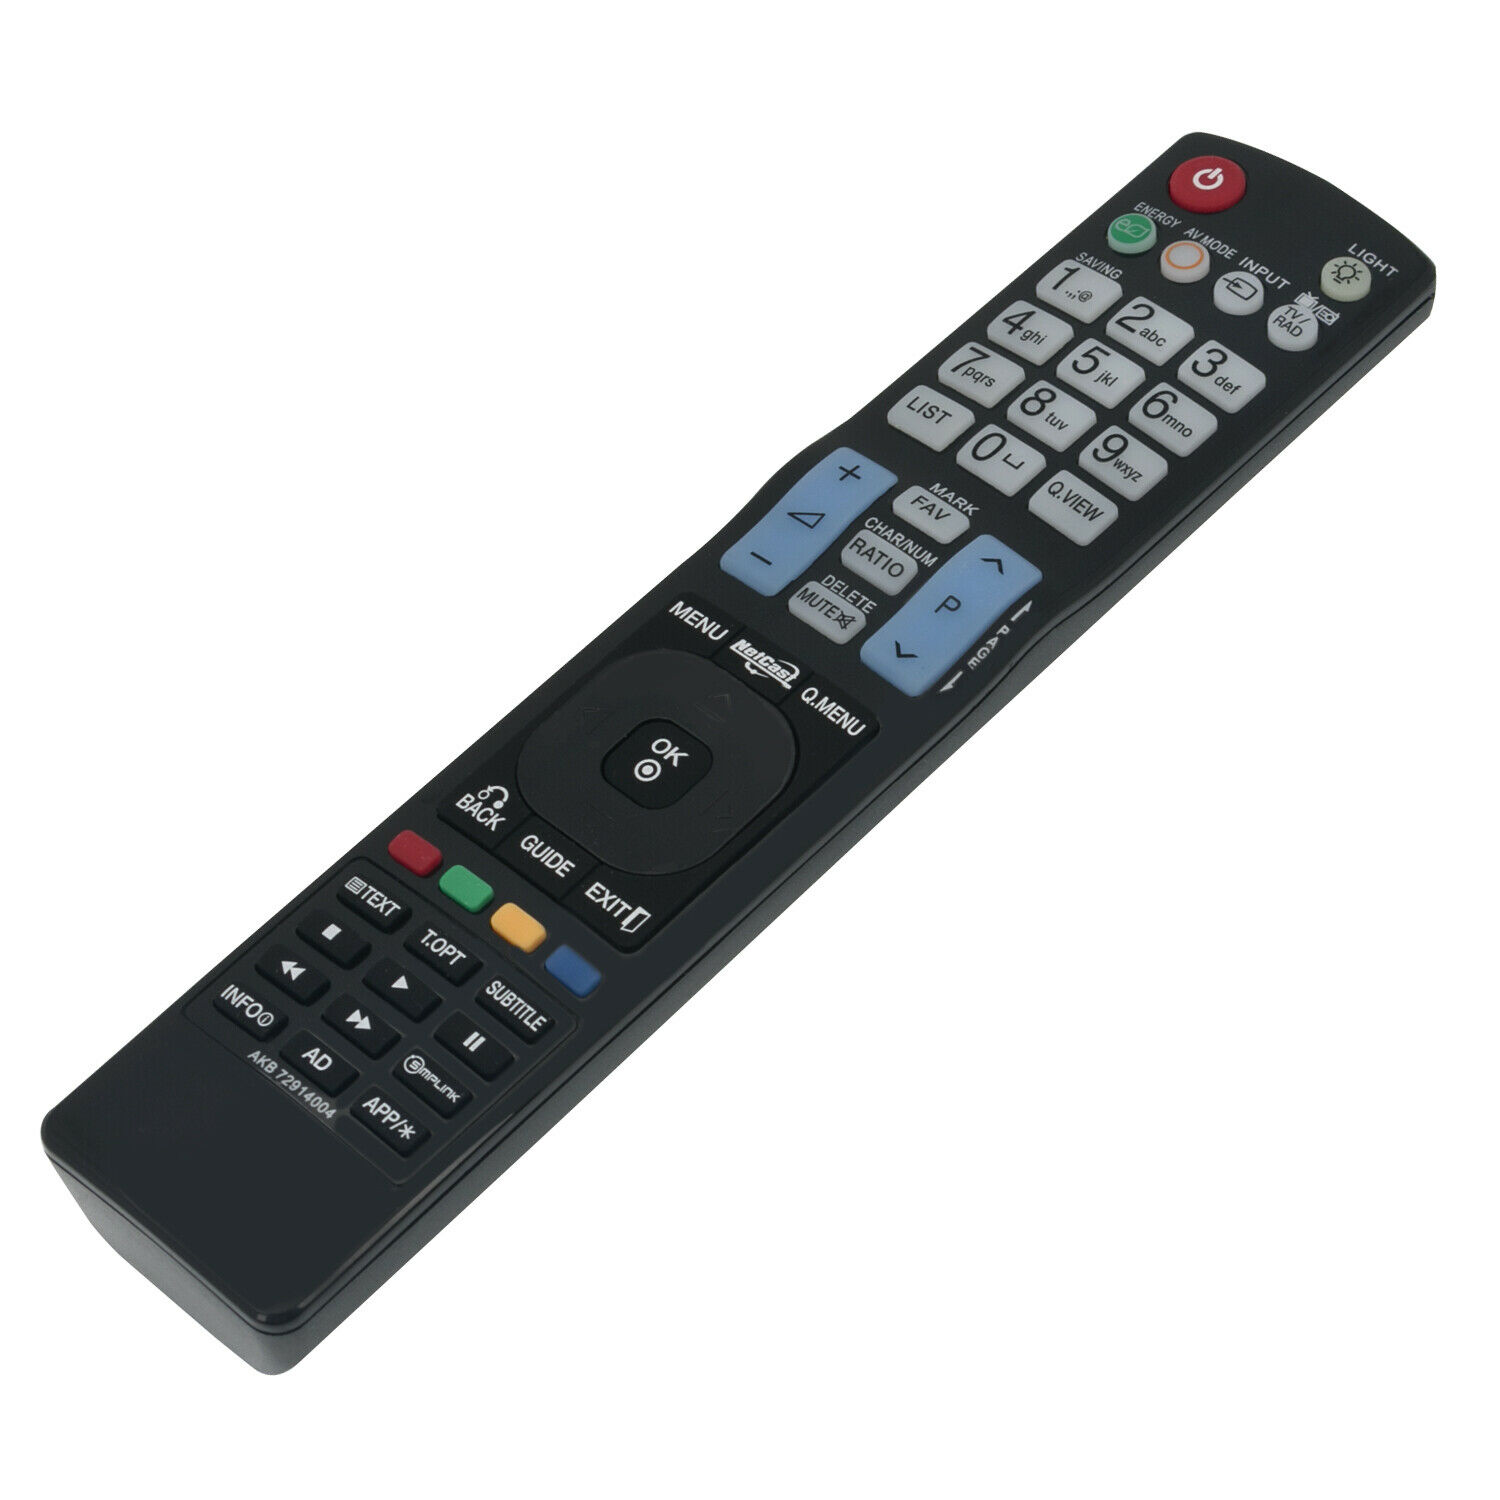 New AKB72914004 Replace Remote for LG TV 32LD650 42LD650 47LD650 55LD650 52LD550 - image 3 of 4